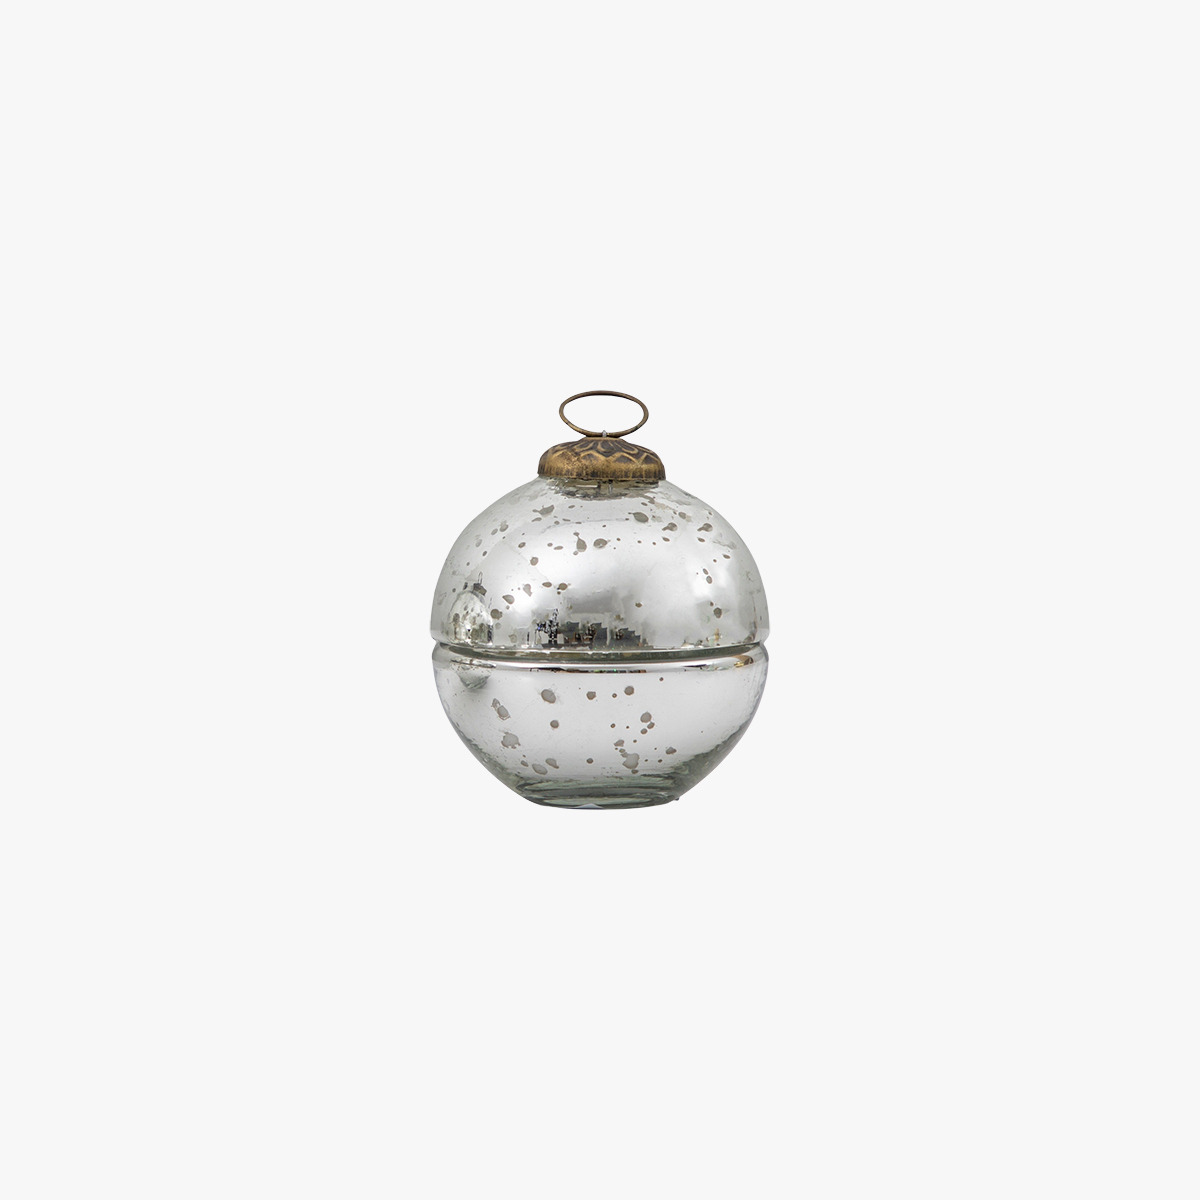 Heritage Bauble Votive Candle in Silver Small Pack of 2